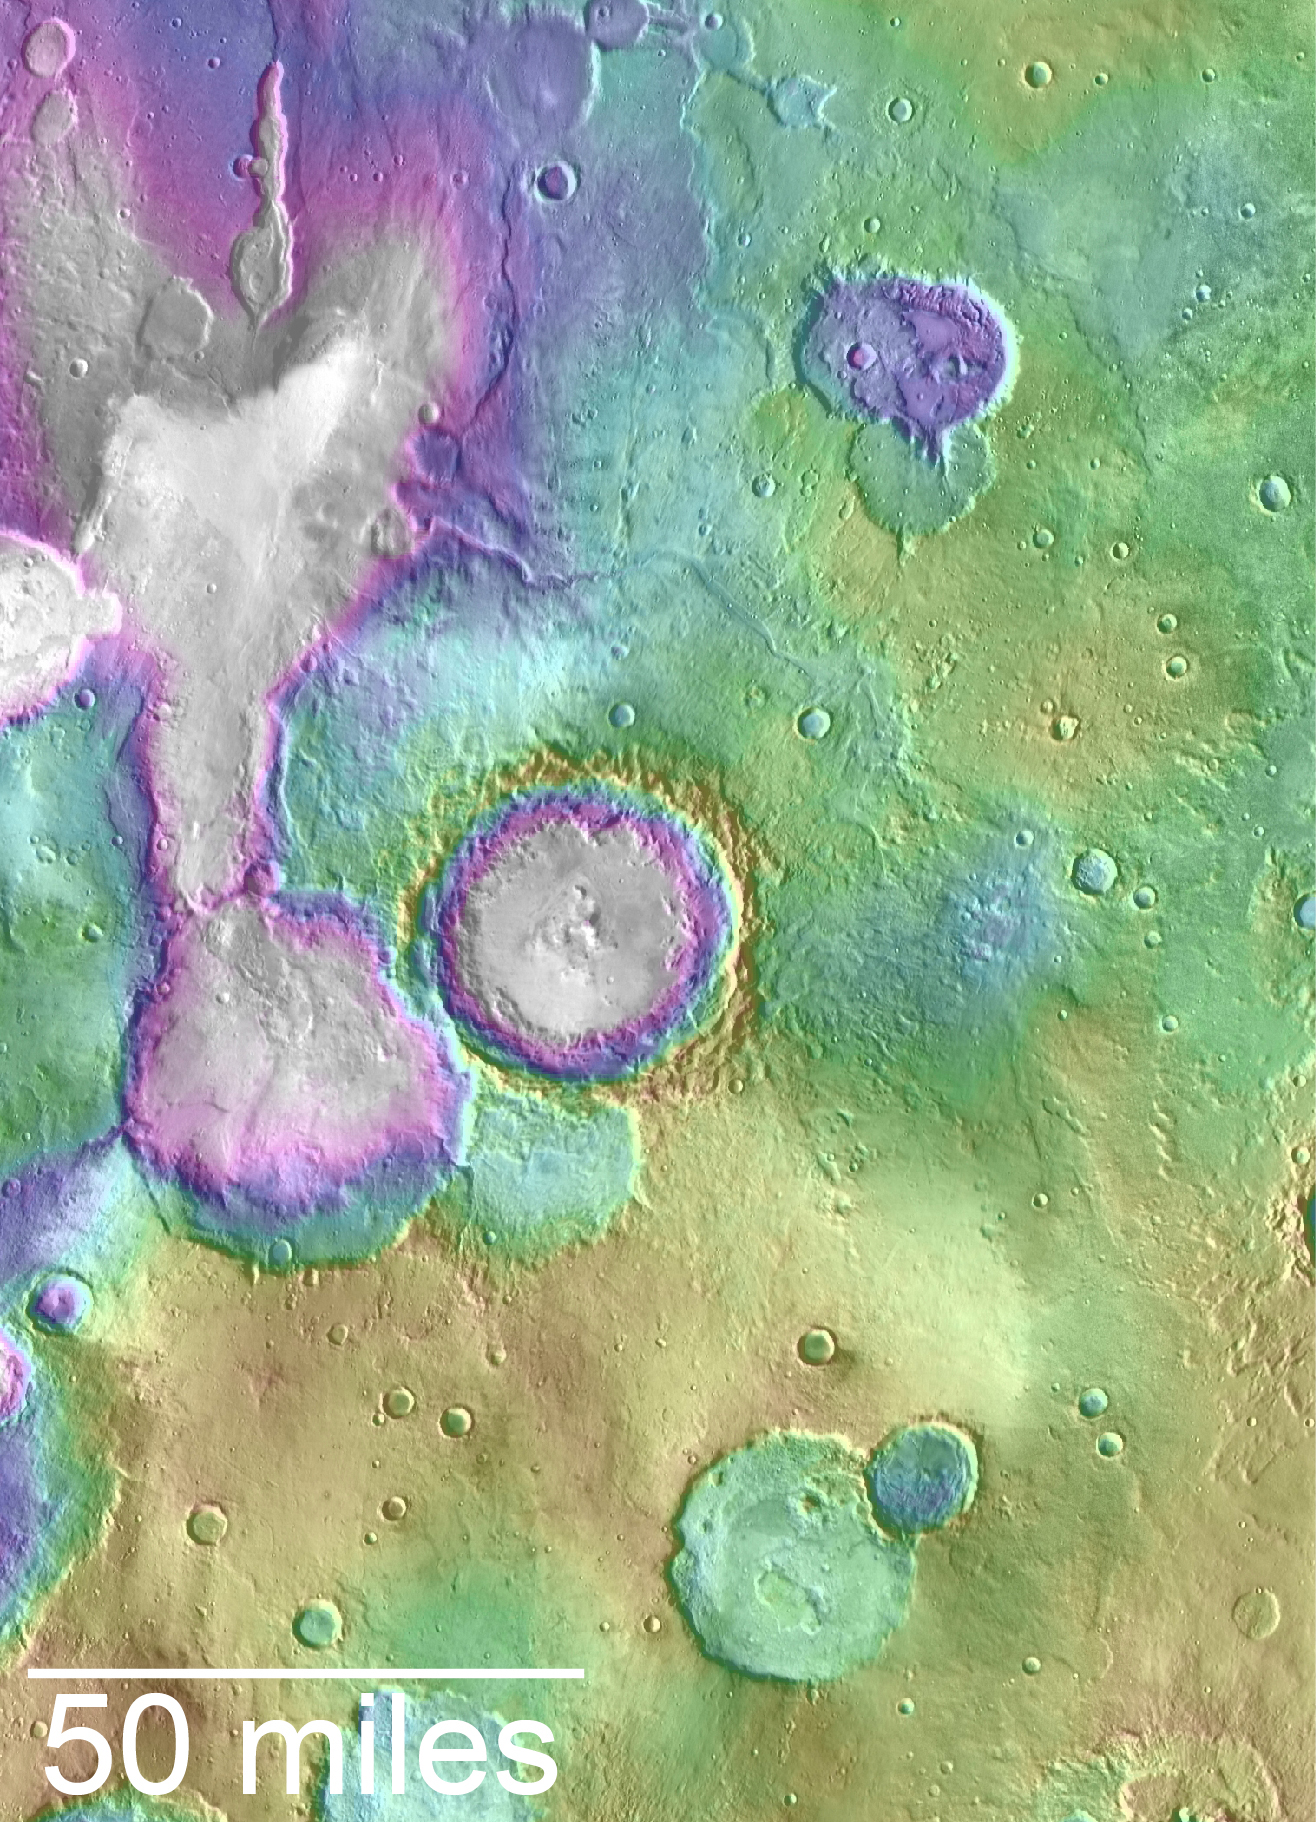 Valleys much younger than well-known ancient valley networks on Mars are evident near the informally named "Heart Lake" on Mars. This map presents color-coded topographical information overlaid onto a photo mosaic. Lower elevations are indicated with white and purple; higher elevations, yellow.